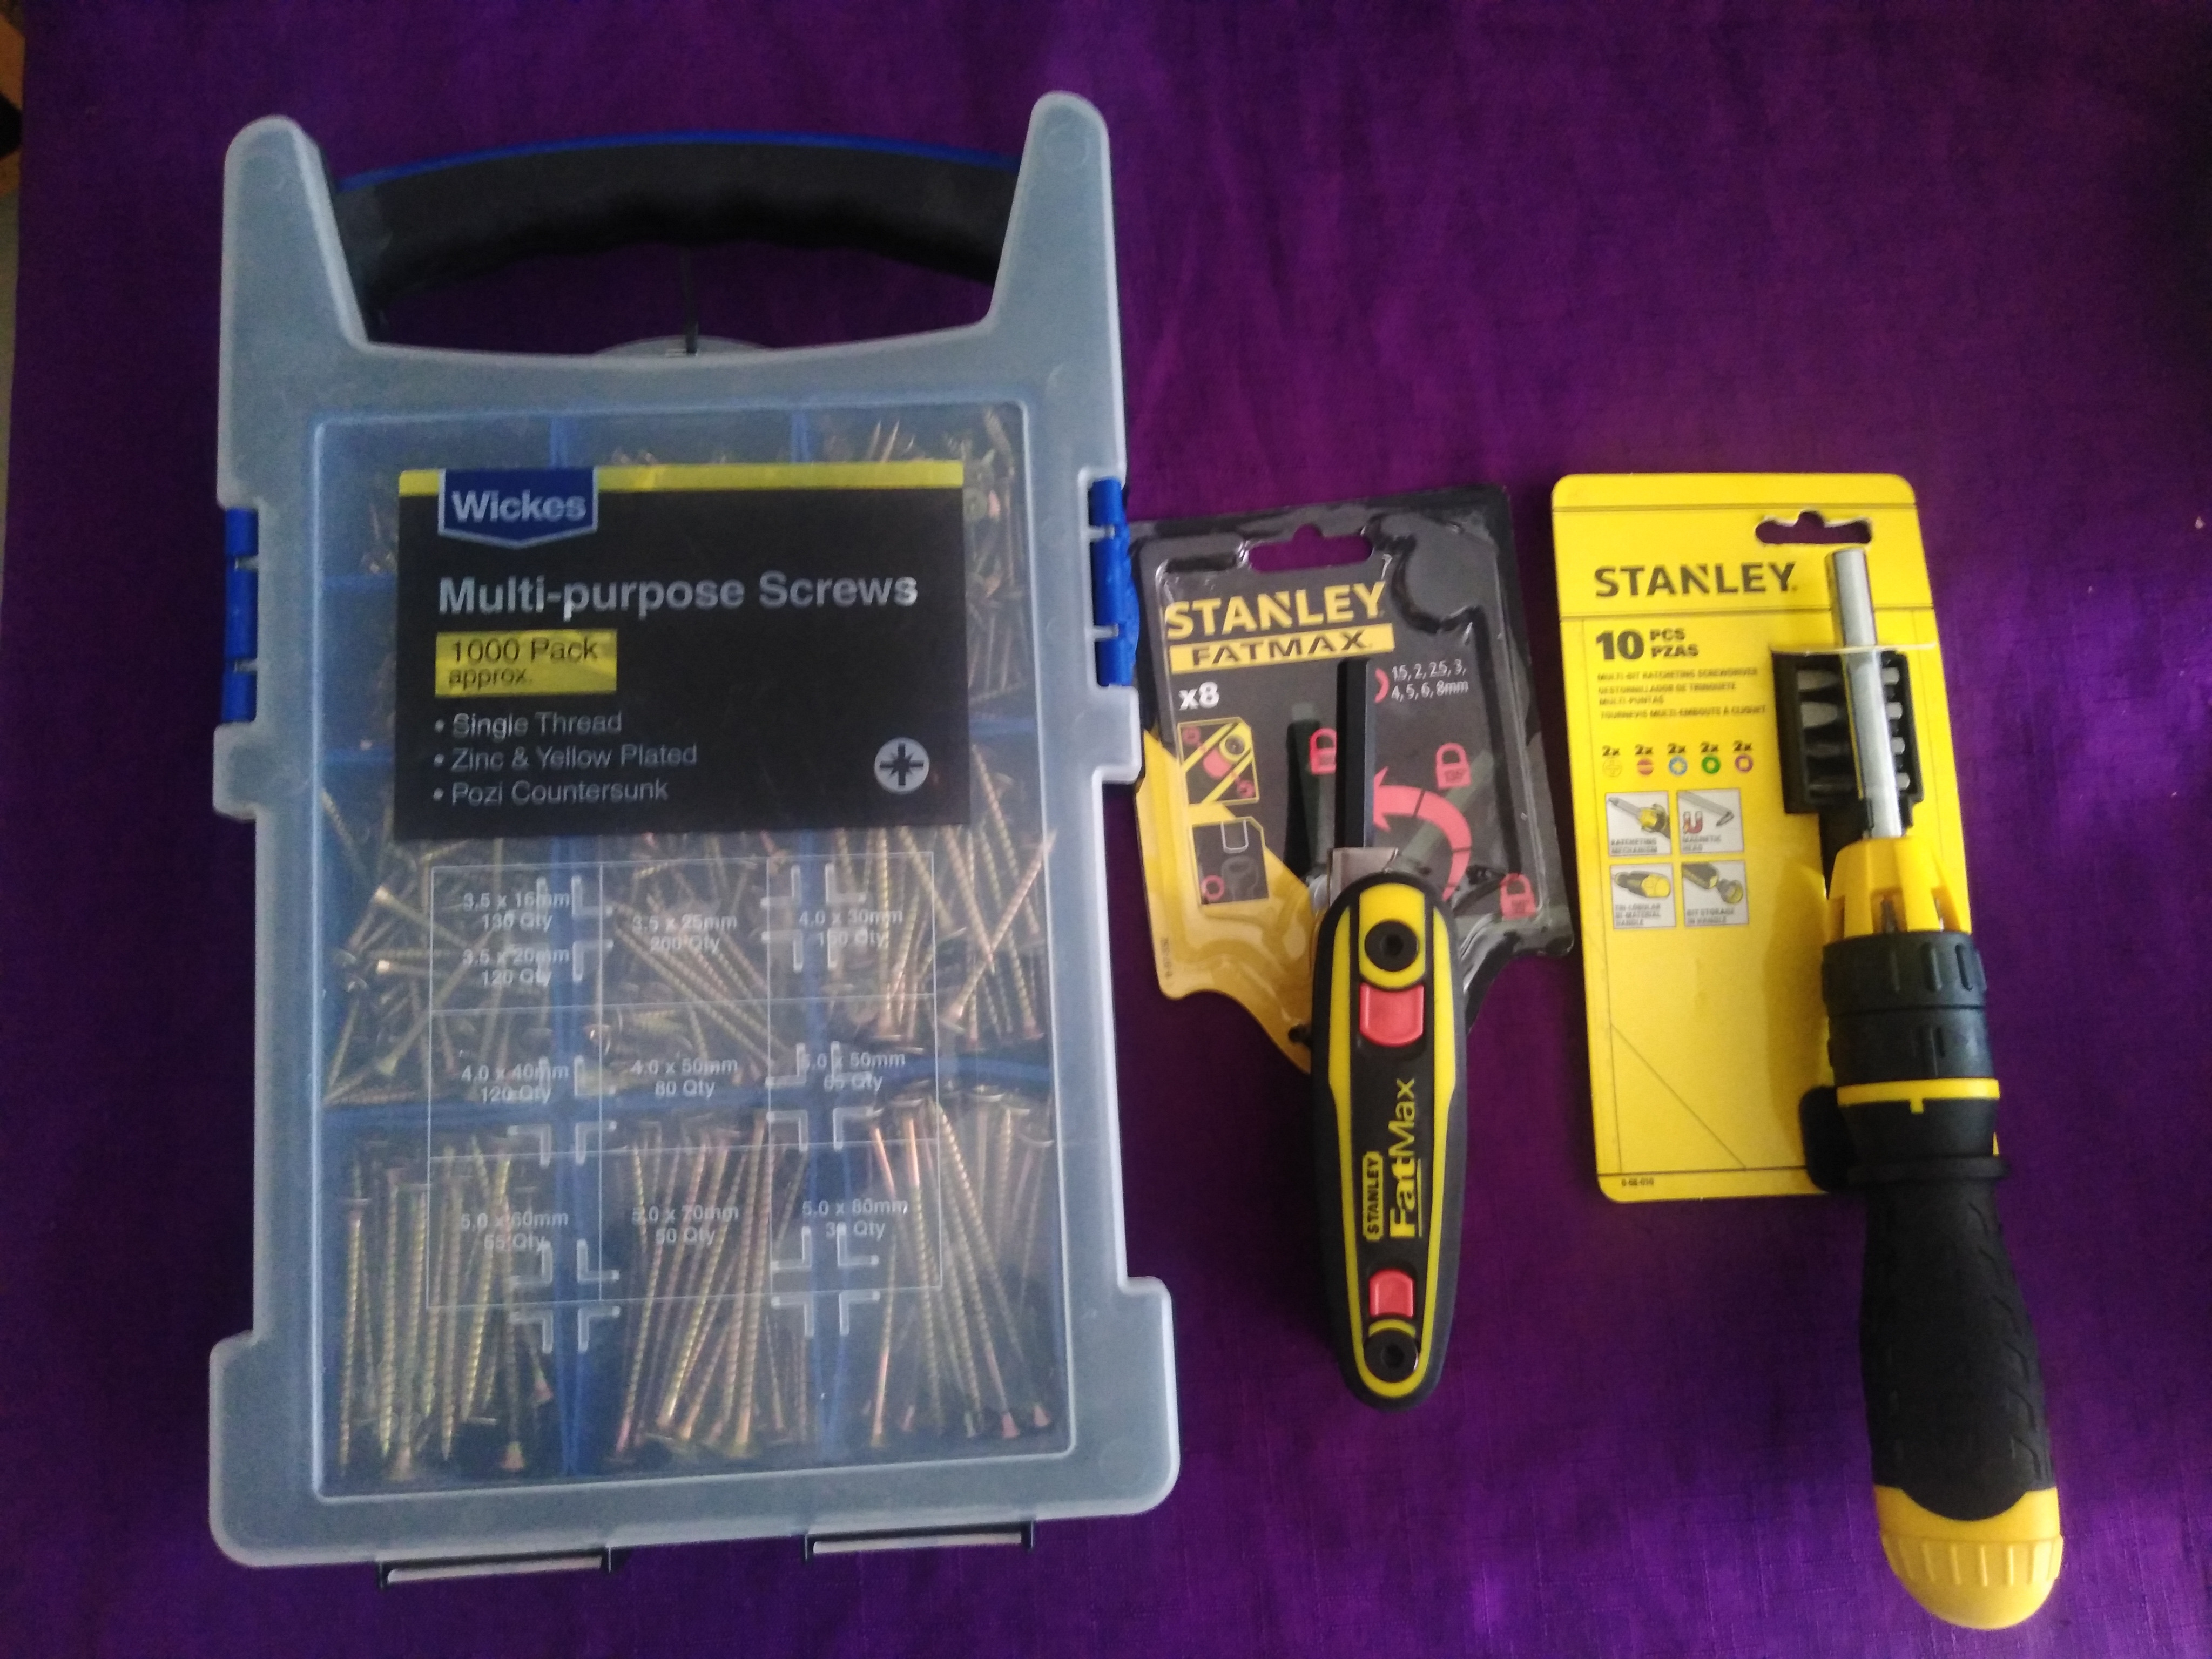 Tools and screws donated by Wickes